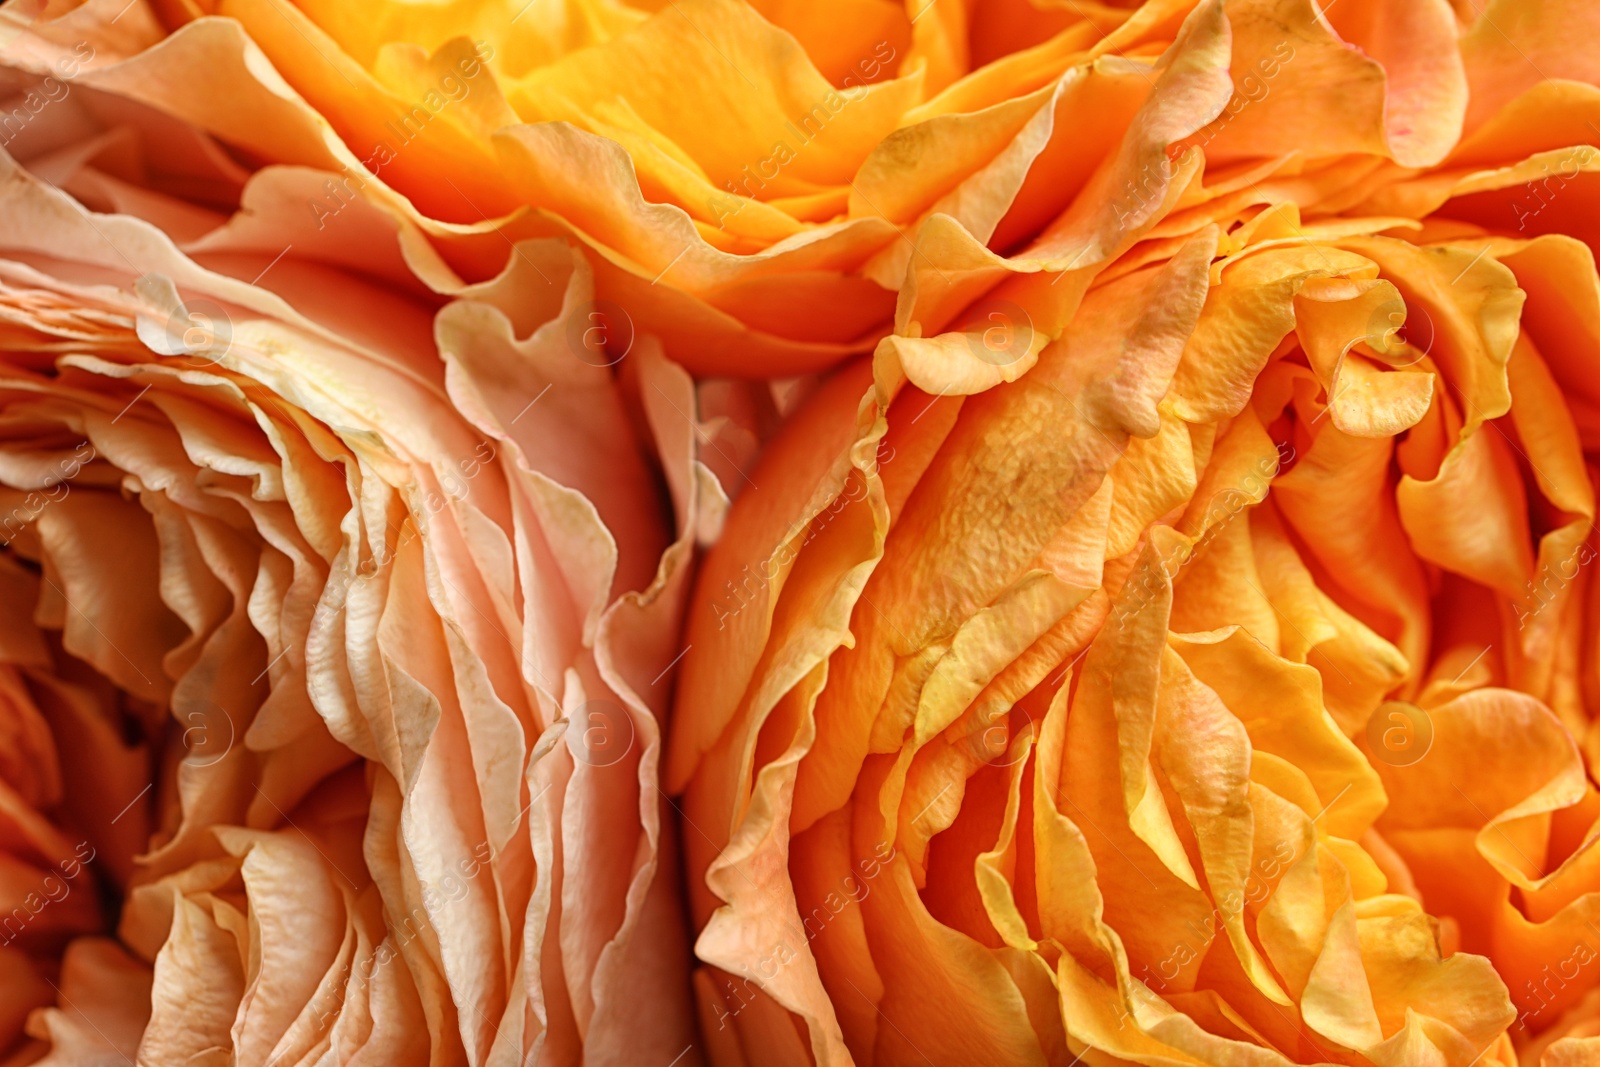 Photo of Beautiful fresh roses as background, closeup view. Floral decor